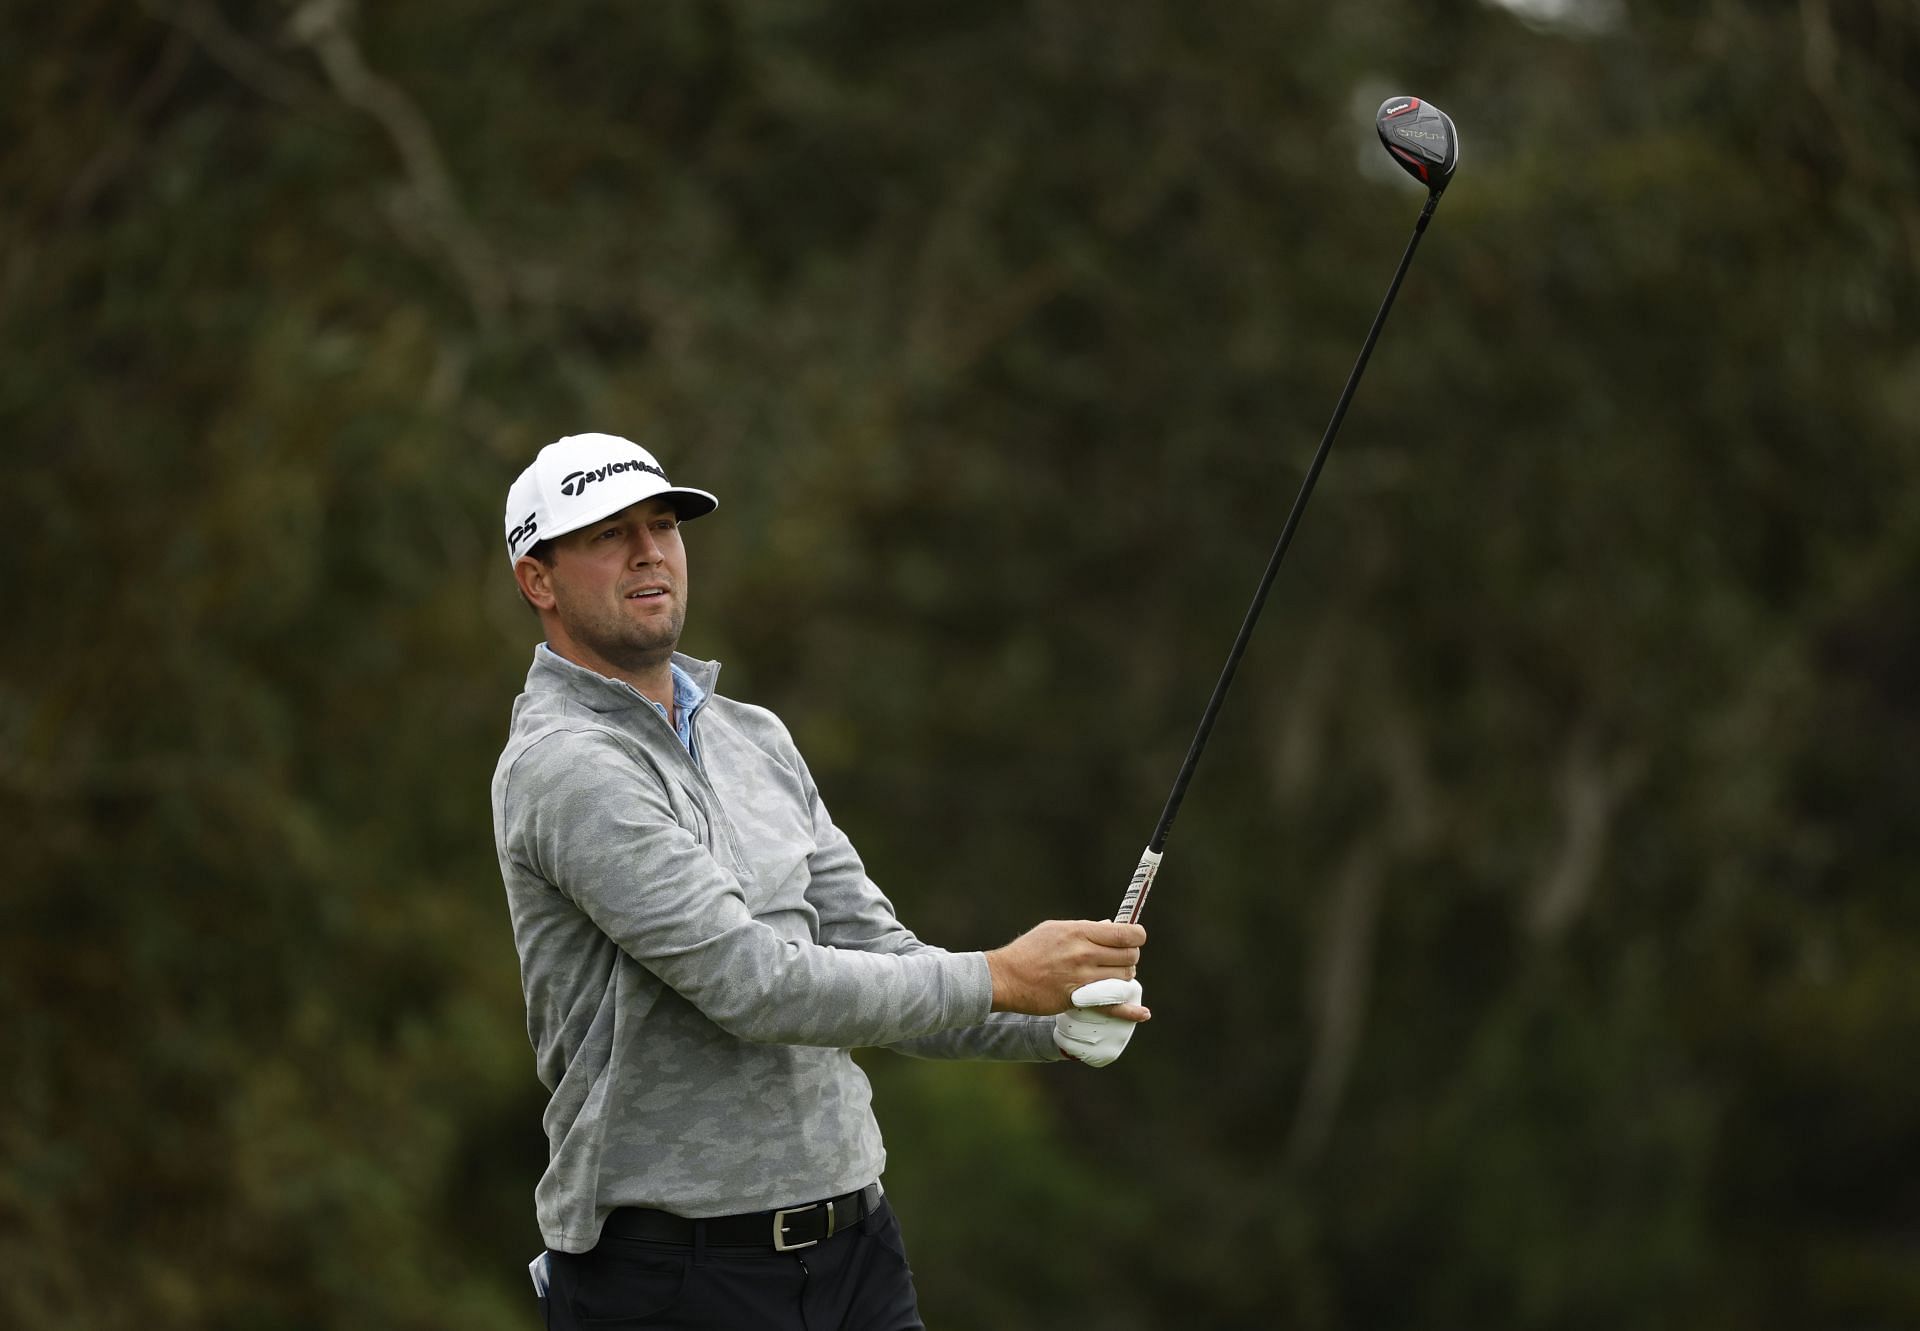 Taylor Montgomery at The RSM Classic - Final Round (Image via Cliff Hawkins/Getty Images)